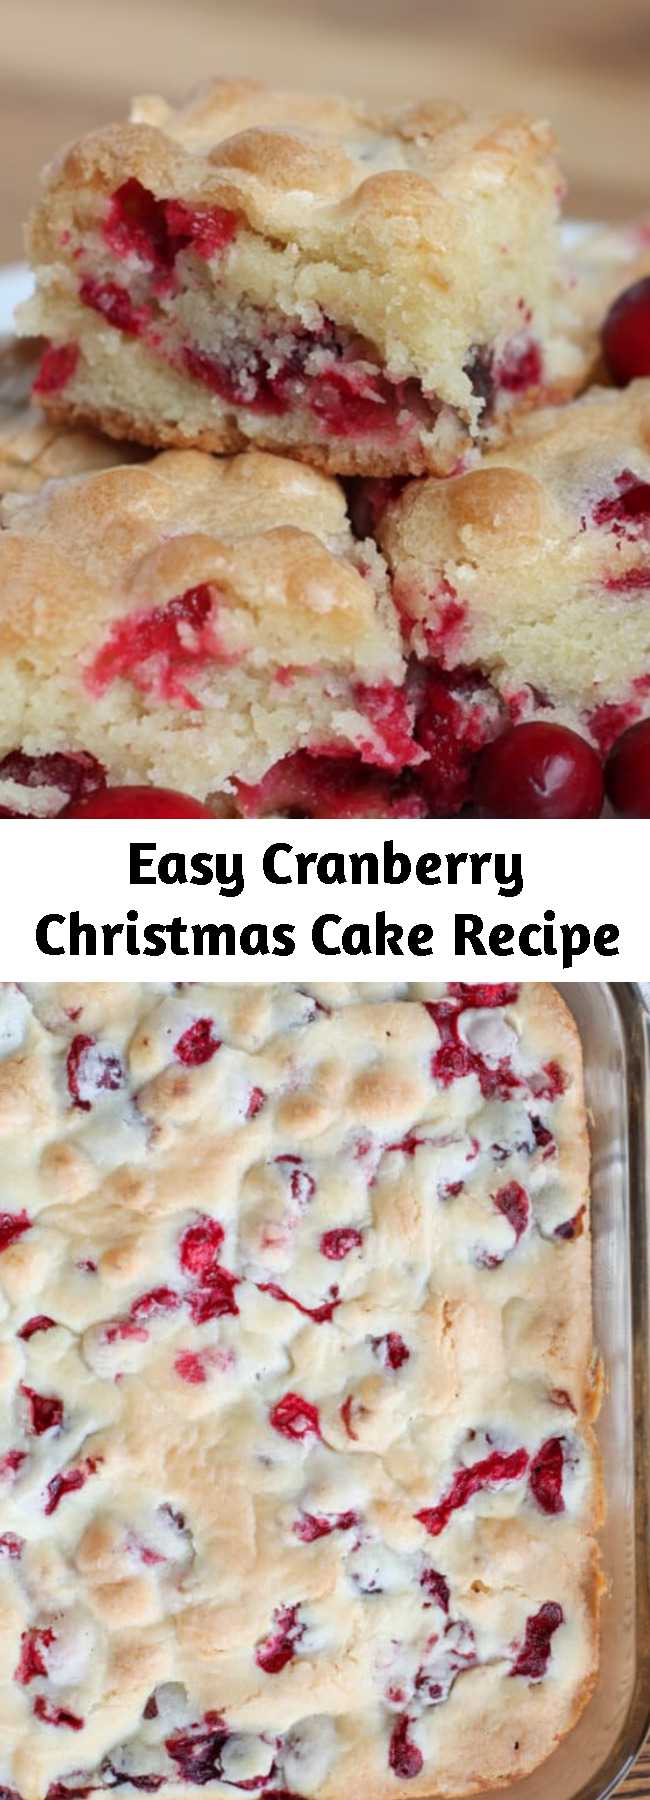 Easy Cranberry Christmas Cake Recipe - Tart cranberries, sweet buttery cake, and a fantastic texture all combined to basically beg me to eat another piece. This Cranberry Christmas Cake is one of those recipes that is an instant favorite every single time someone new tastes it.